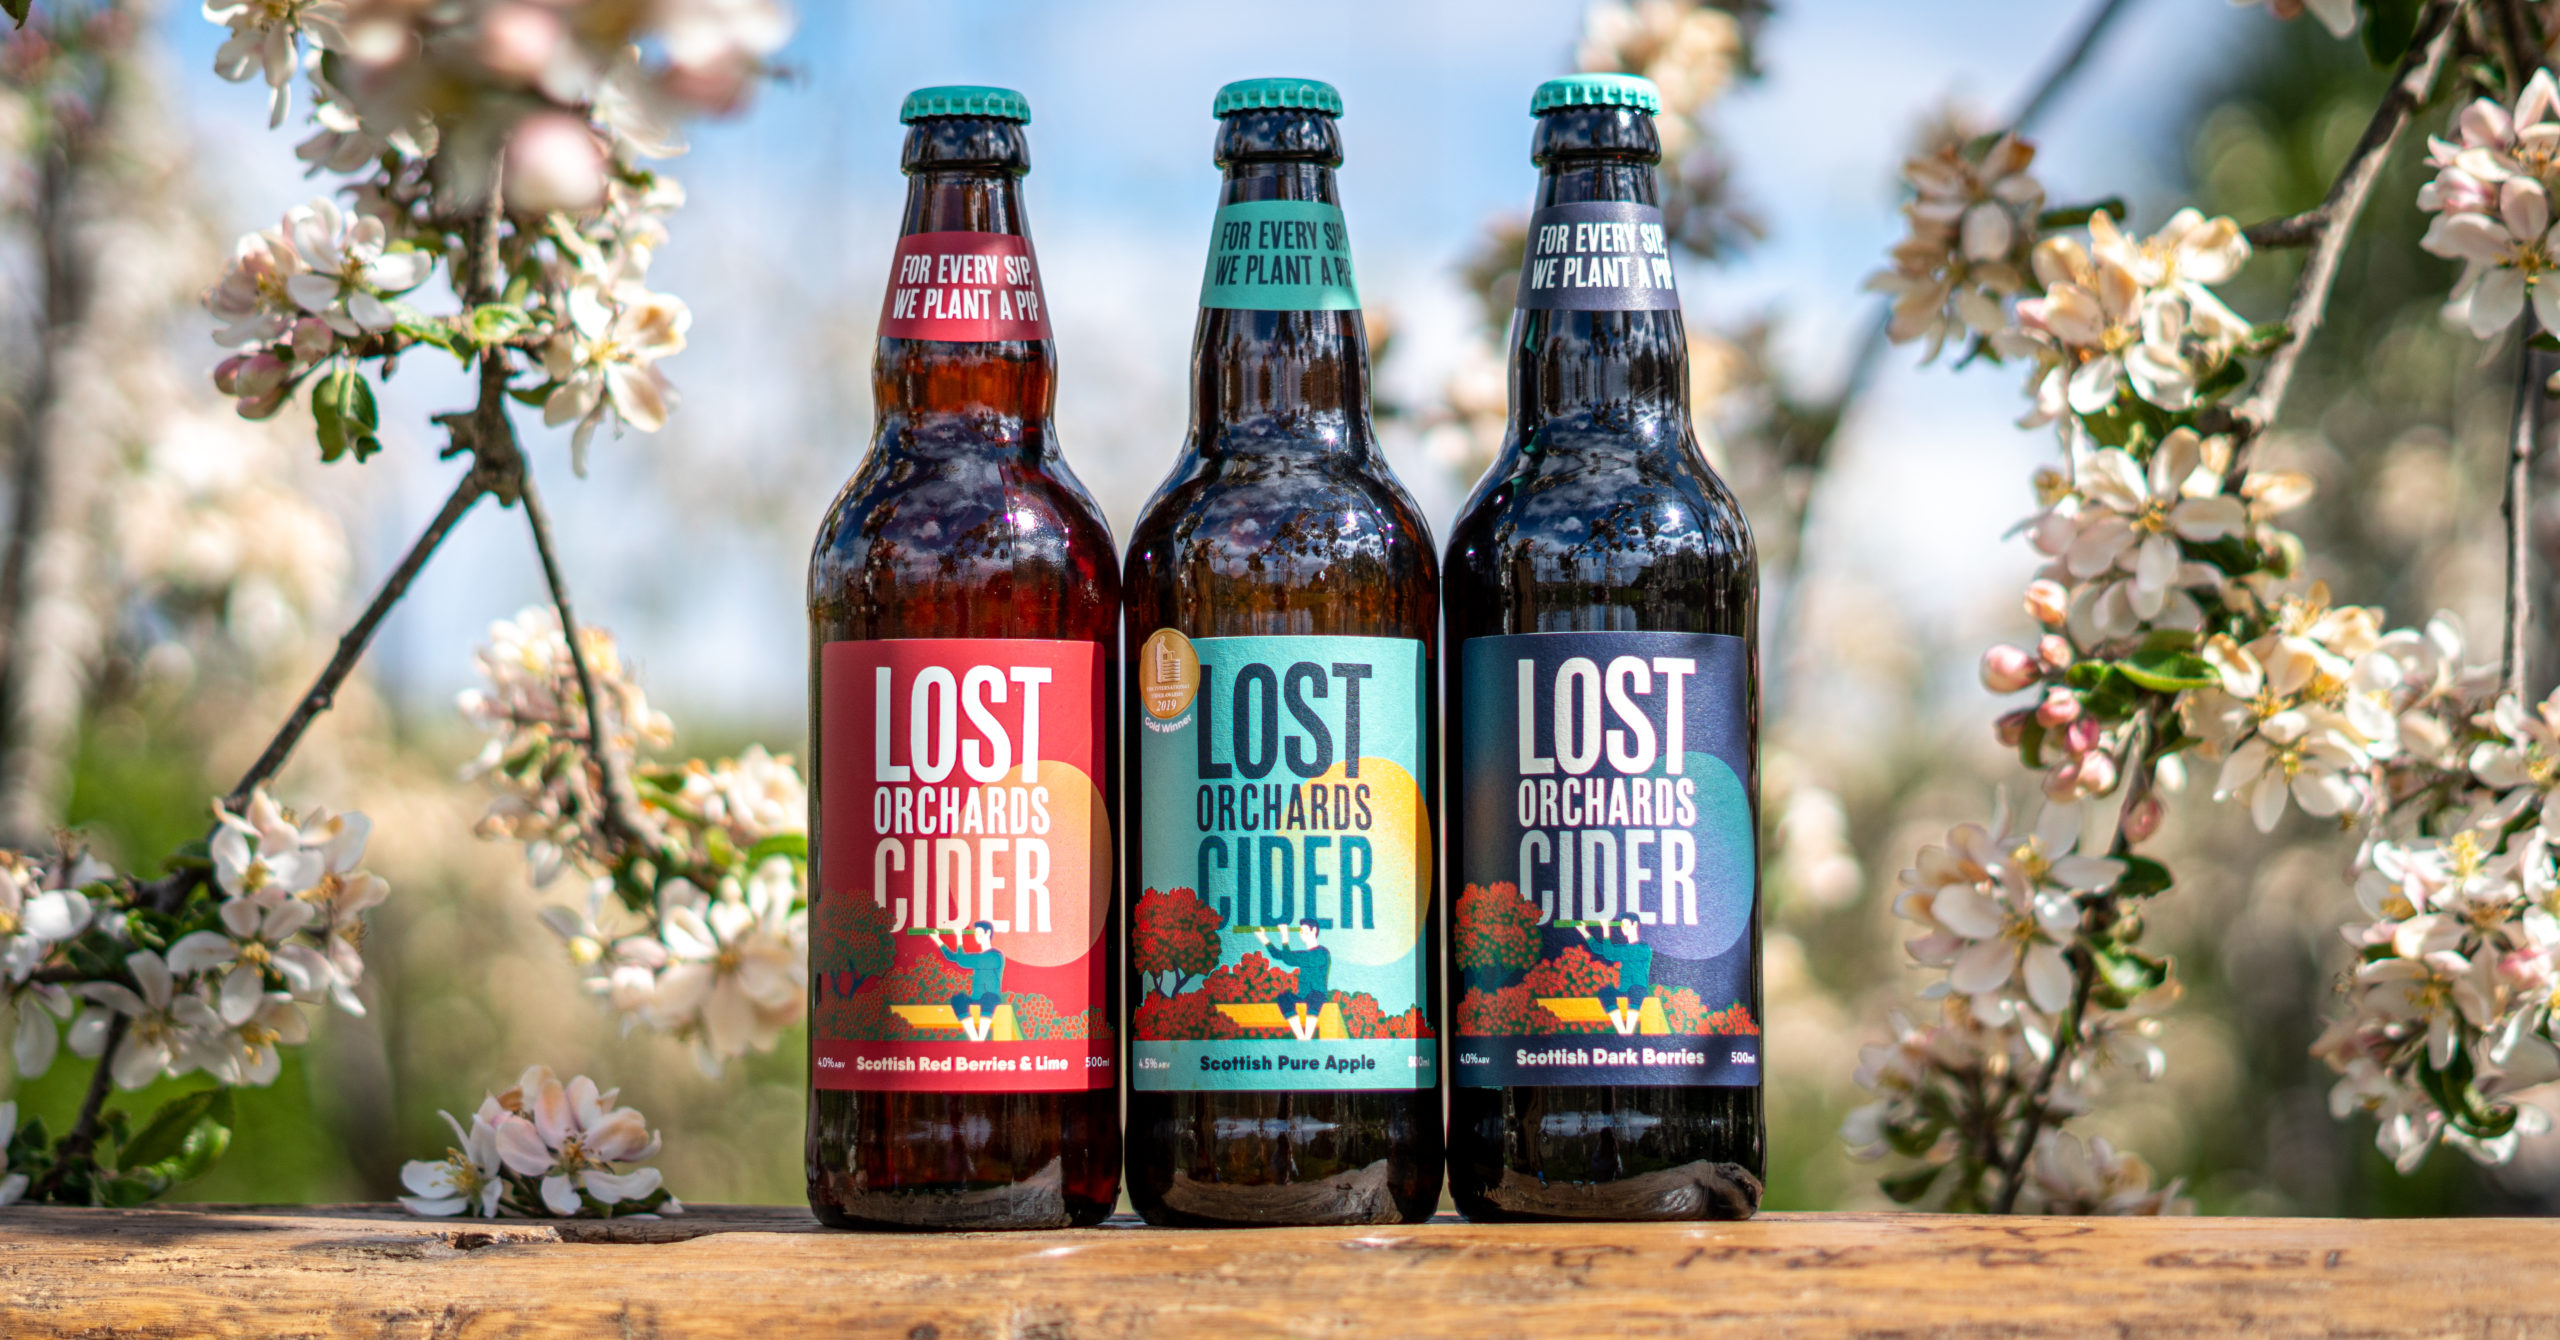 https://wpcluster.dctdigital.com/thecourier/wp-content/uploads/sites/12/2020/05/Lost-Orchards-Product_Shot-scaled.jpg